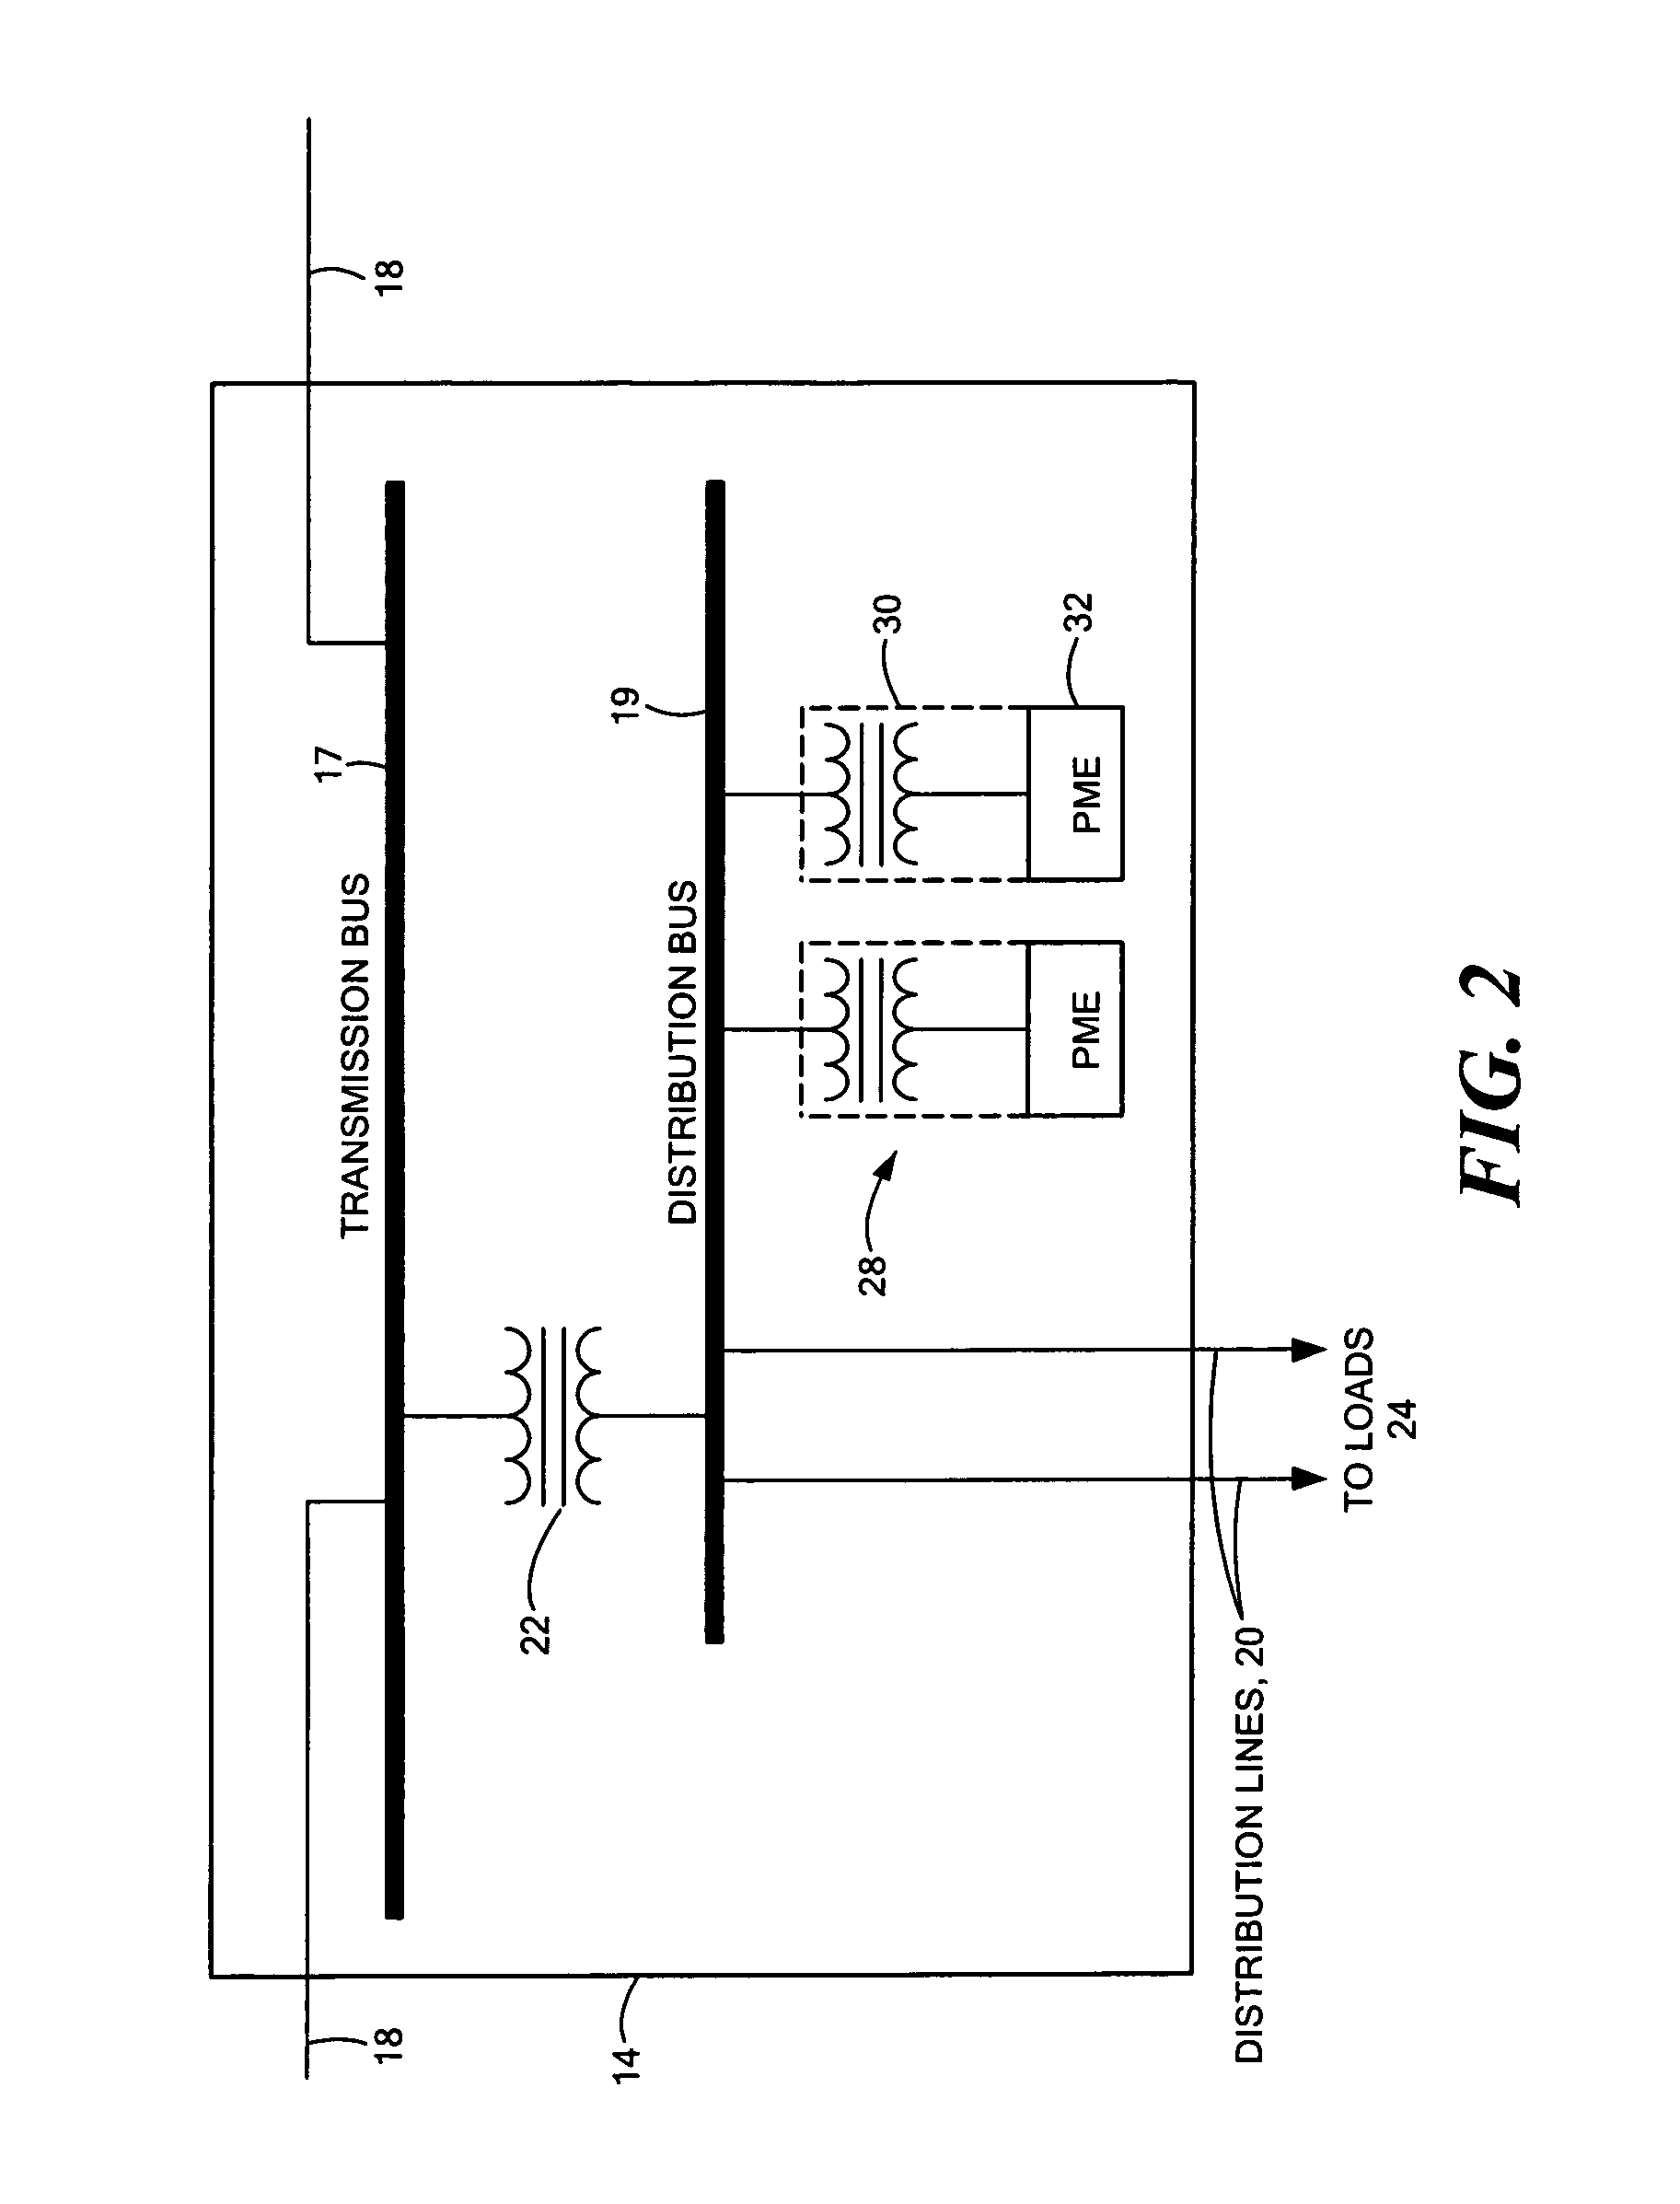 Supplementary transformer cooling in a reactive power compensation system